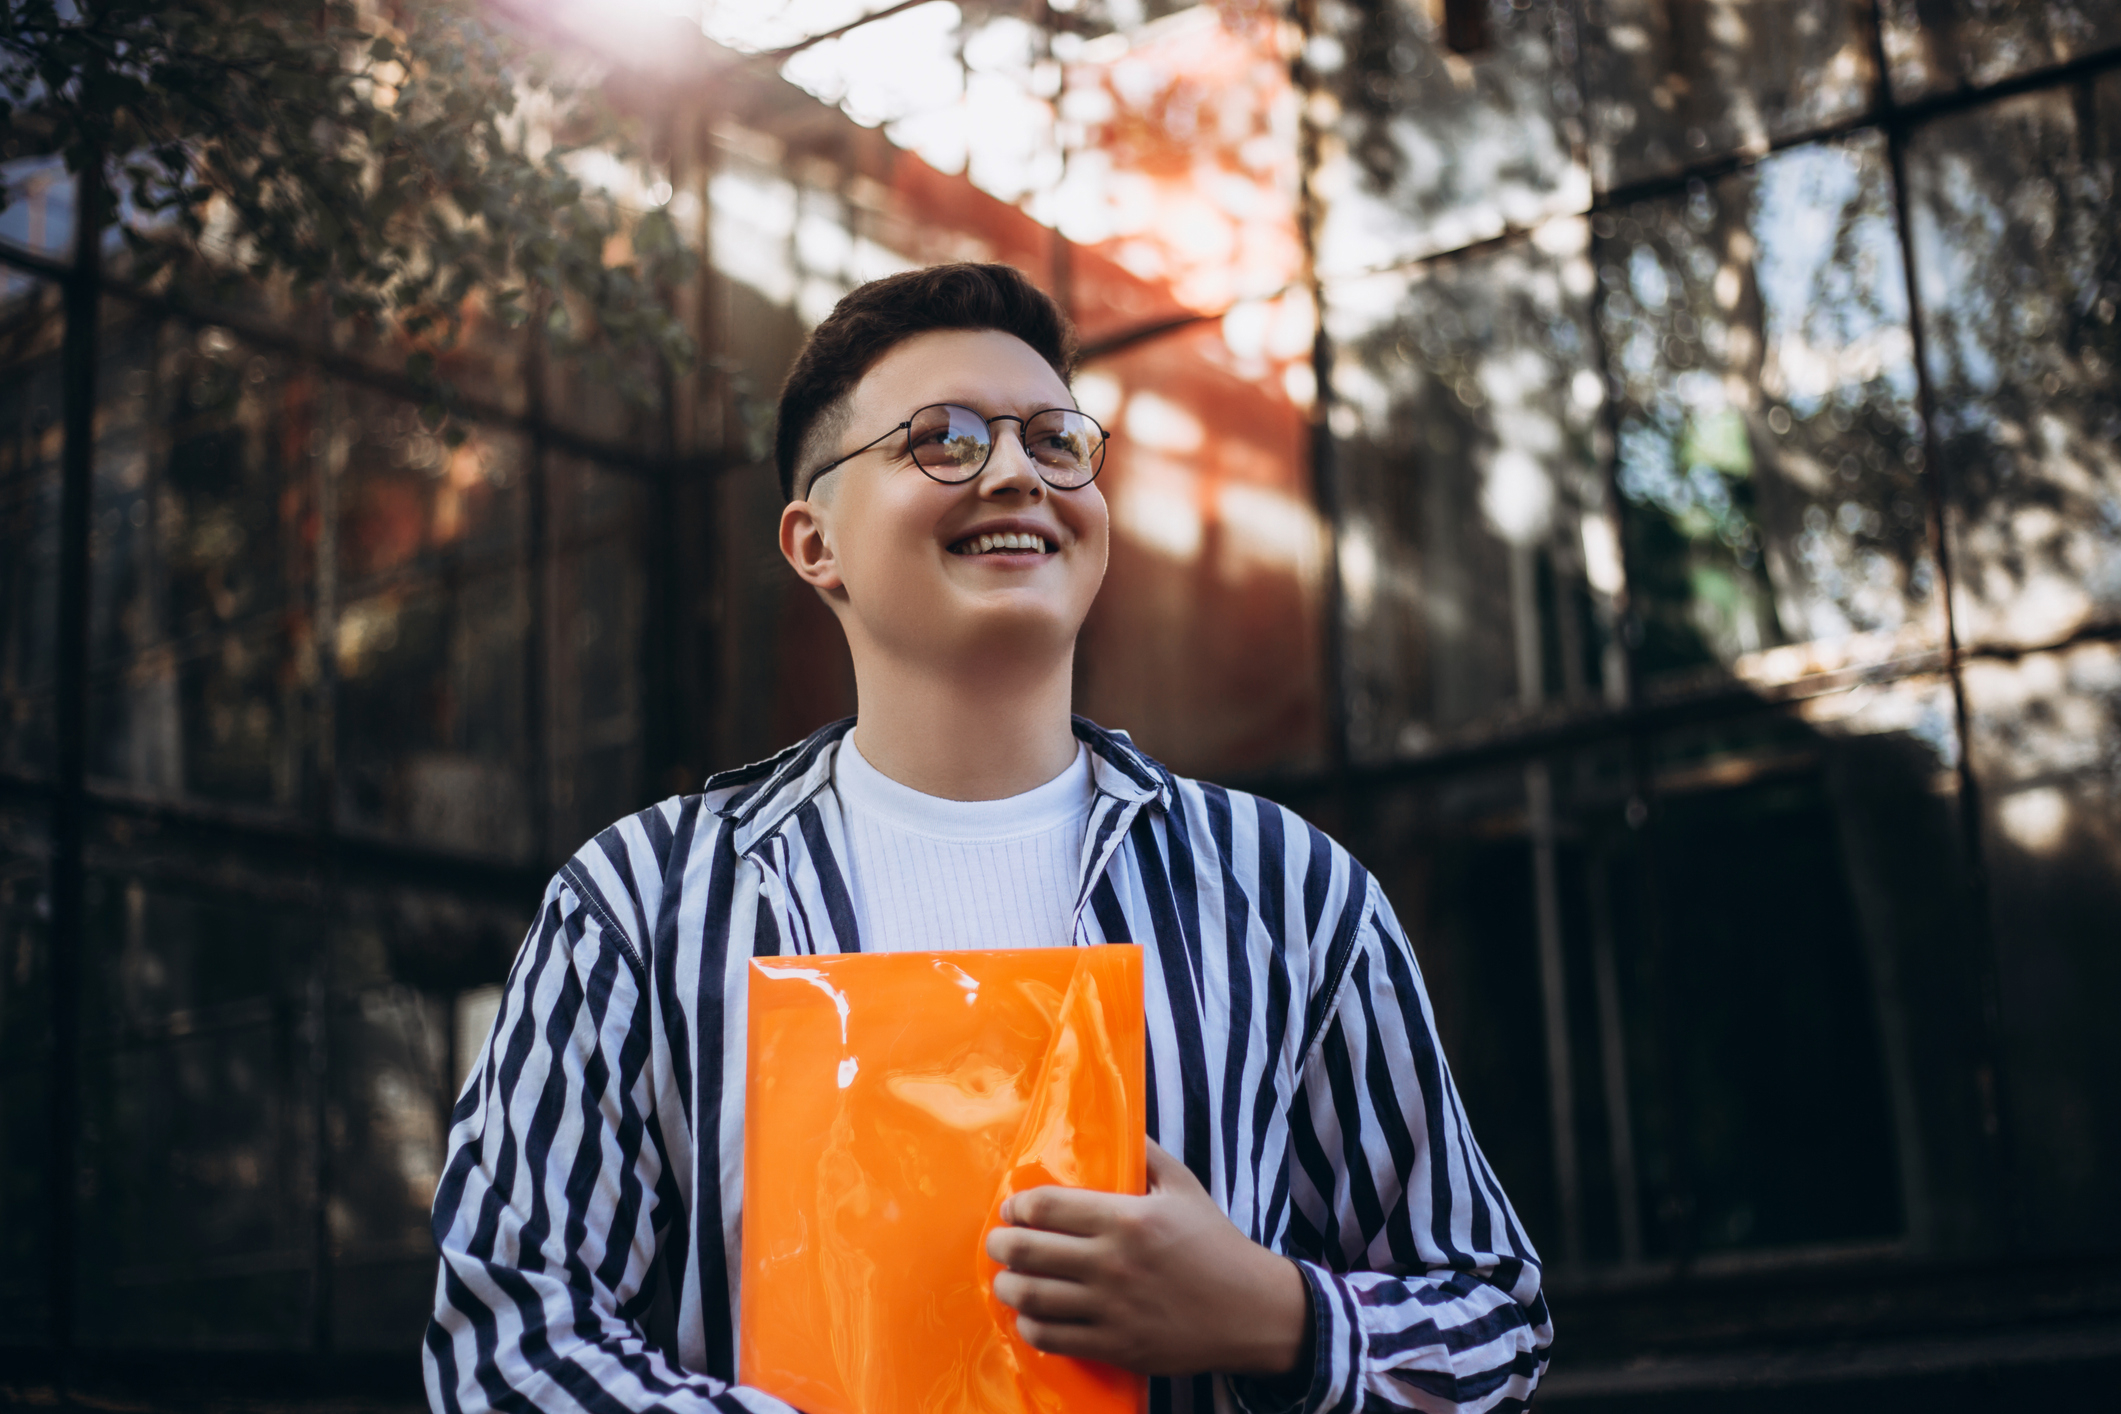 Person holding an orange folder and smiling outdoors, wearing glasses and striped shirt